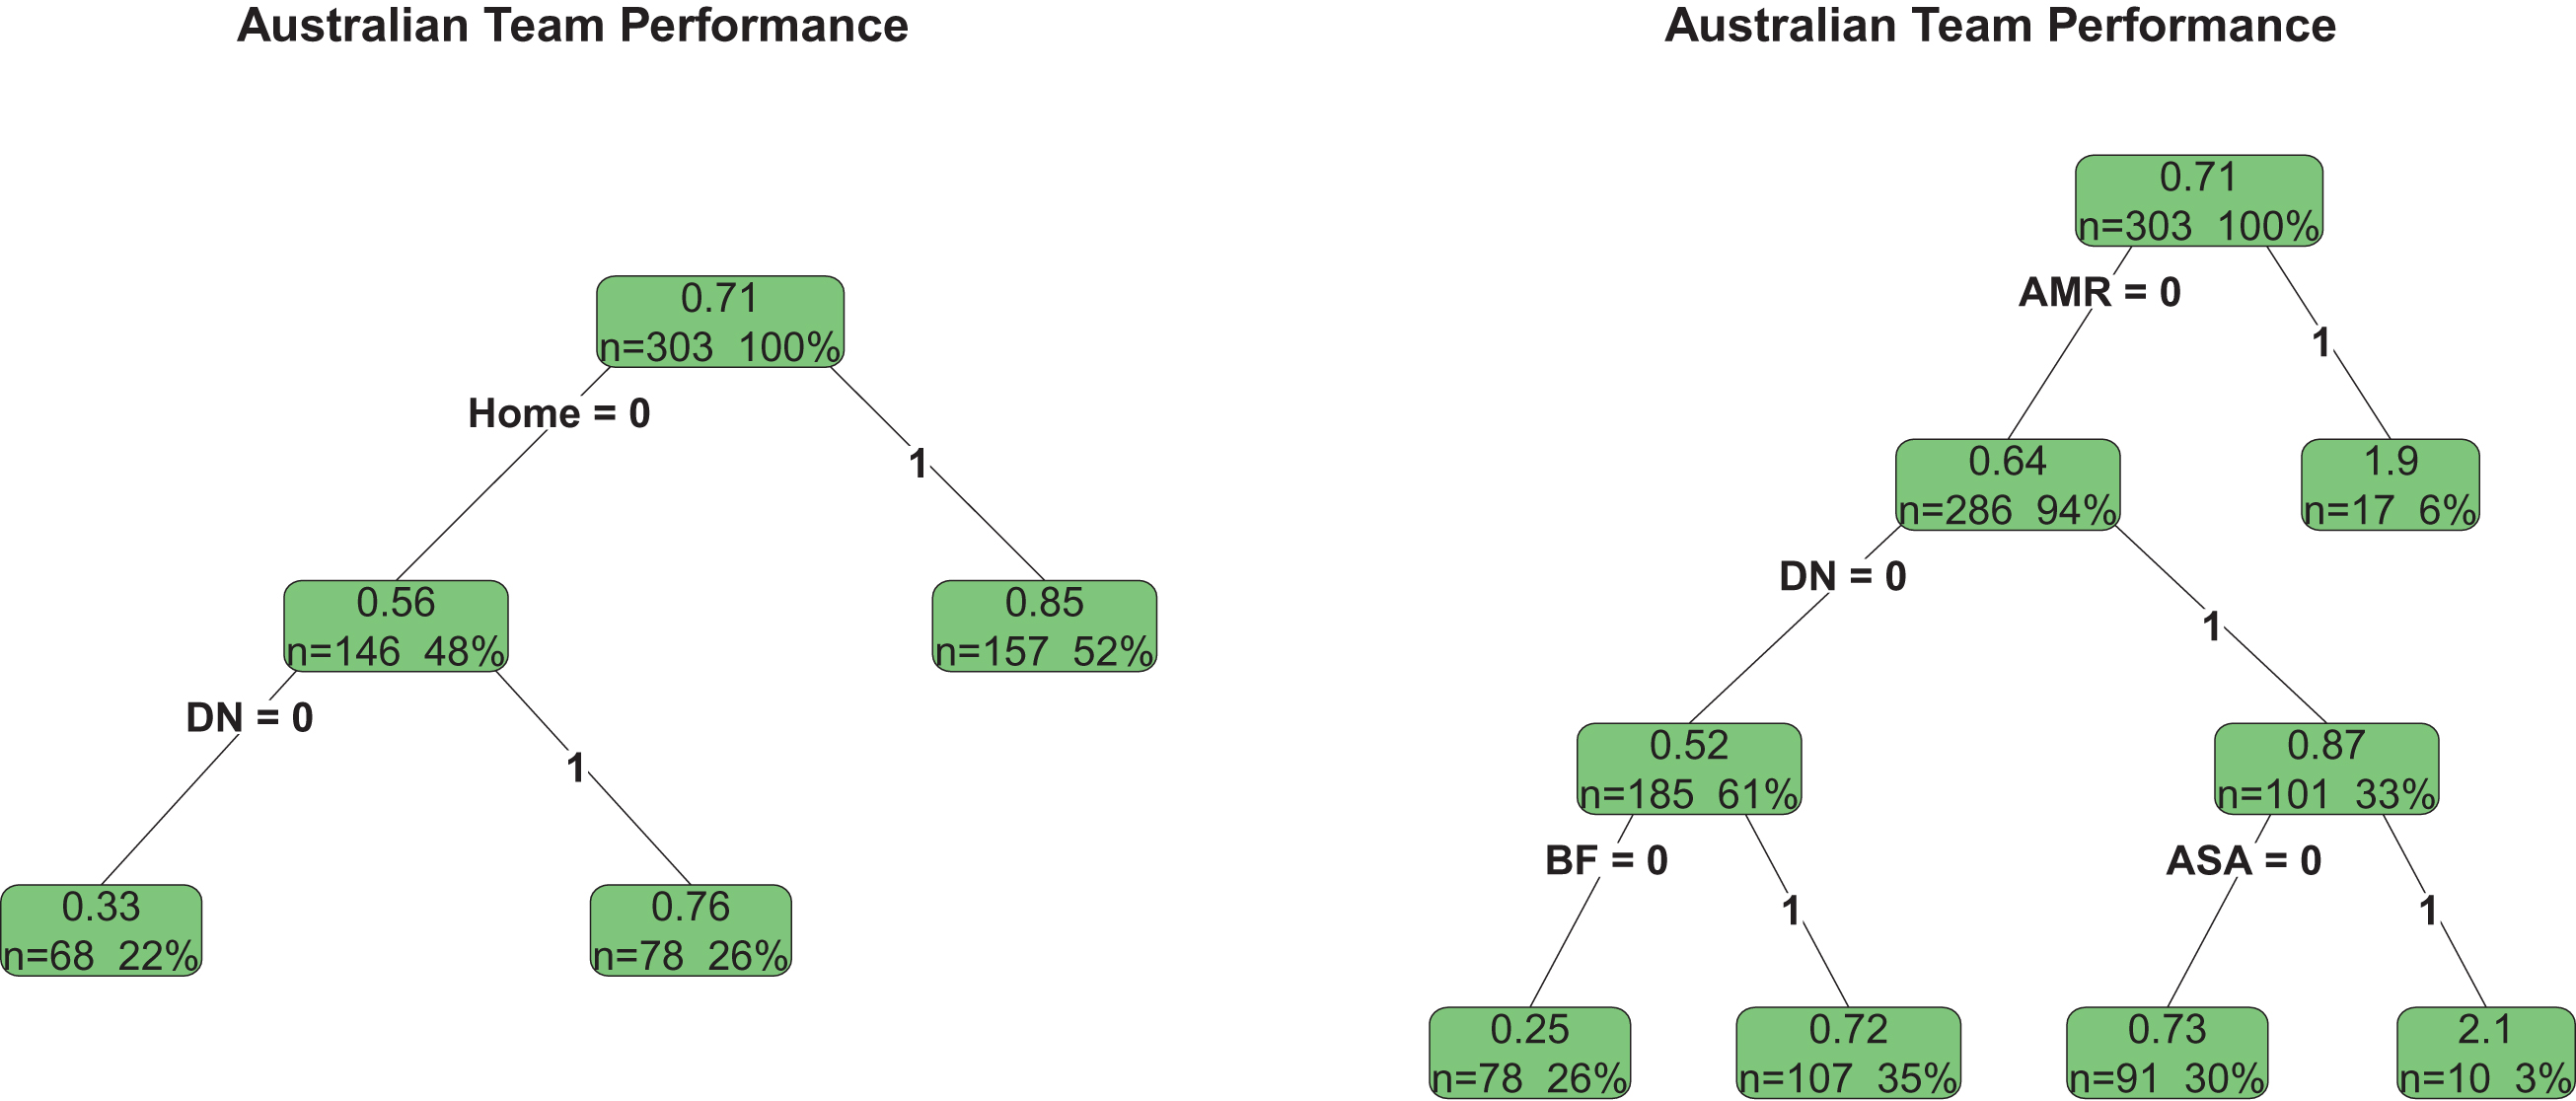 The models (3) and (4) based regression trees for the Australian Team.